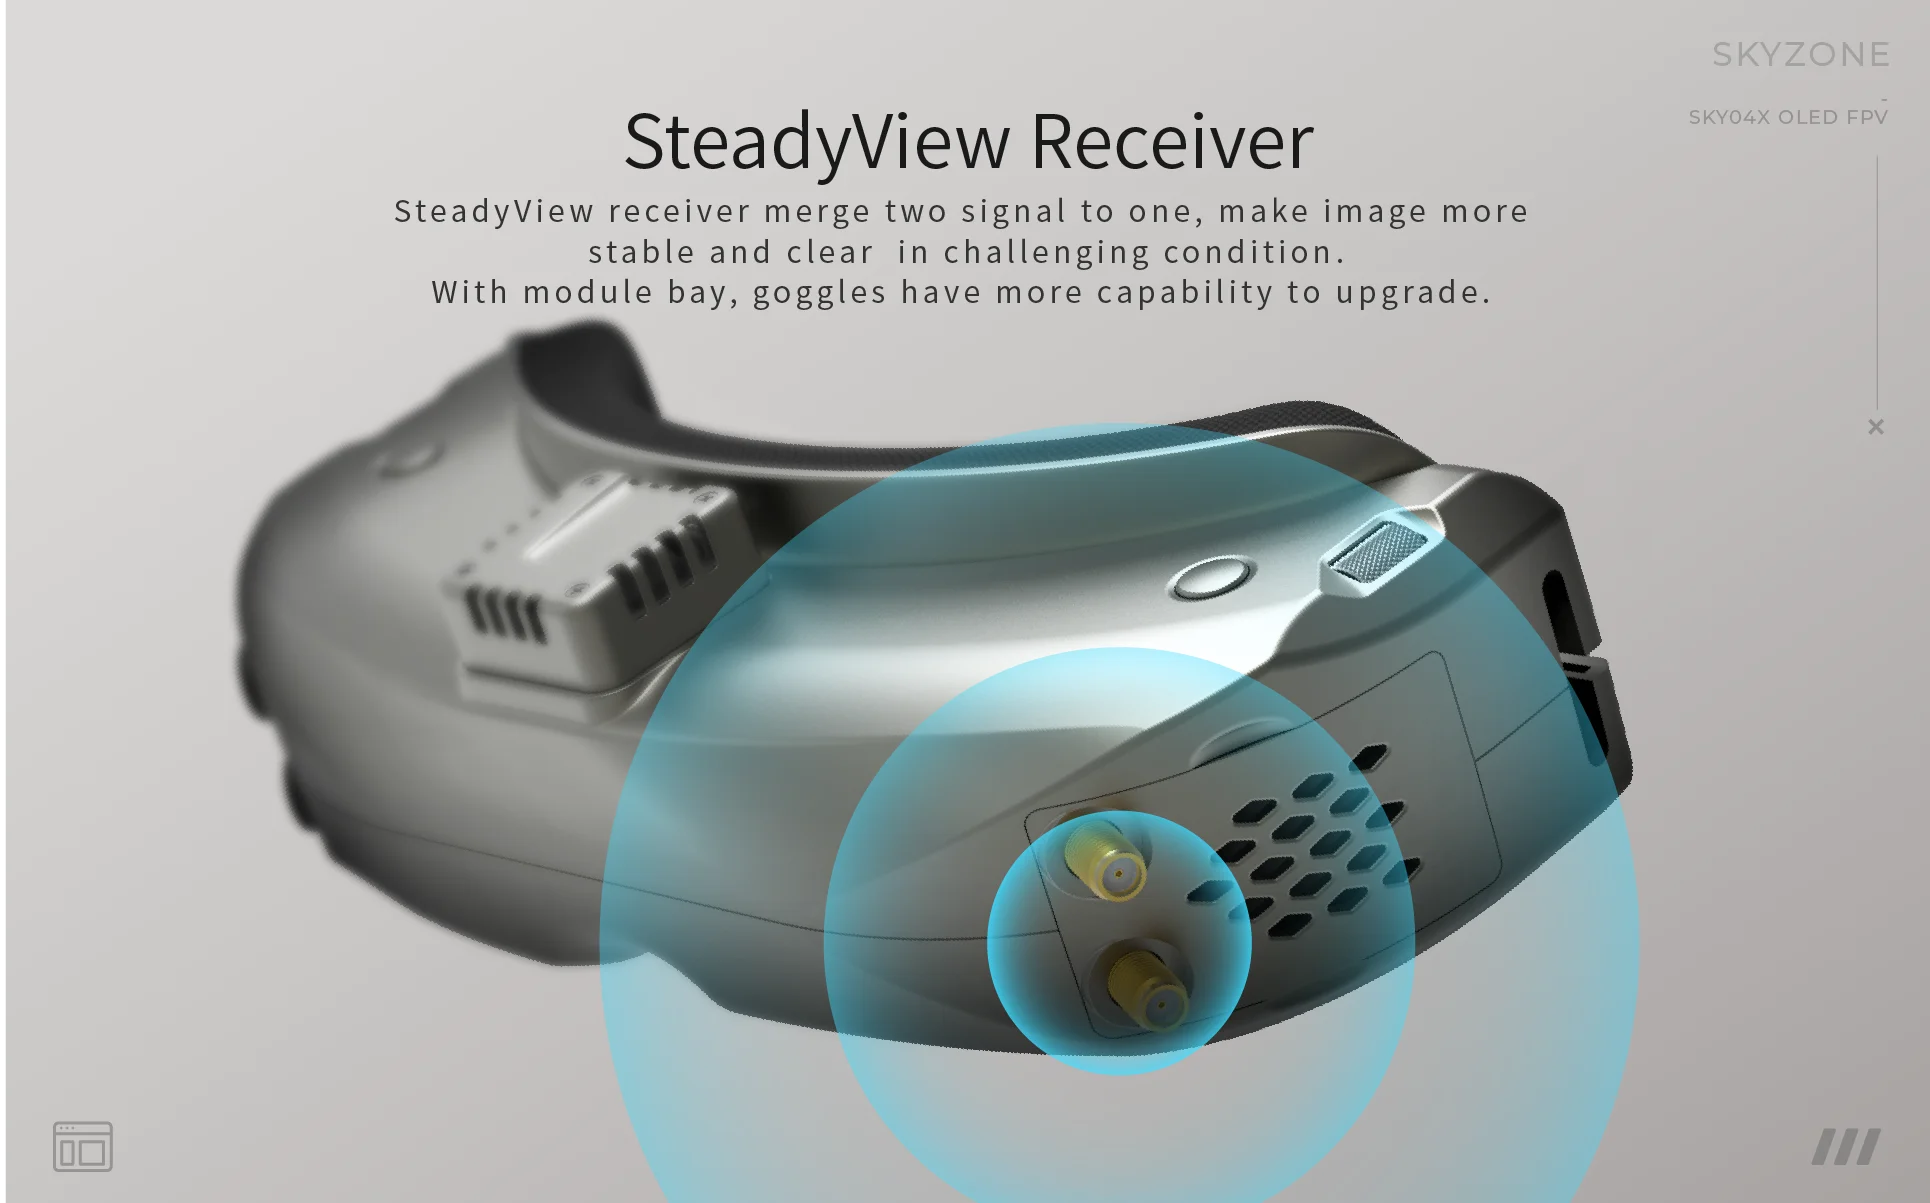 SKYZONE SKY04X V2  FPV Goggle, SteadyView receiver merge two signal to one, make image more stable and clear in